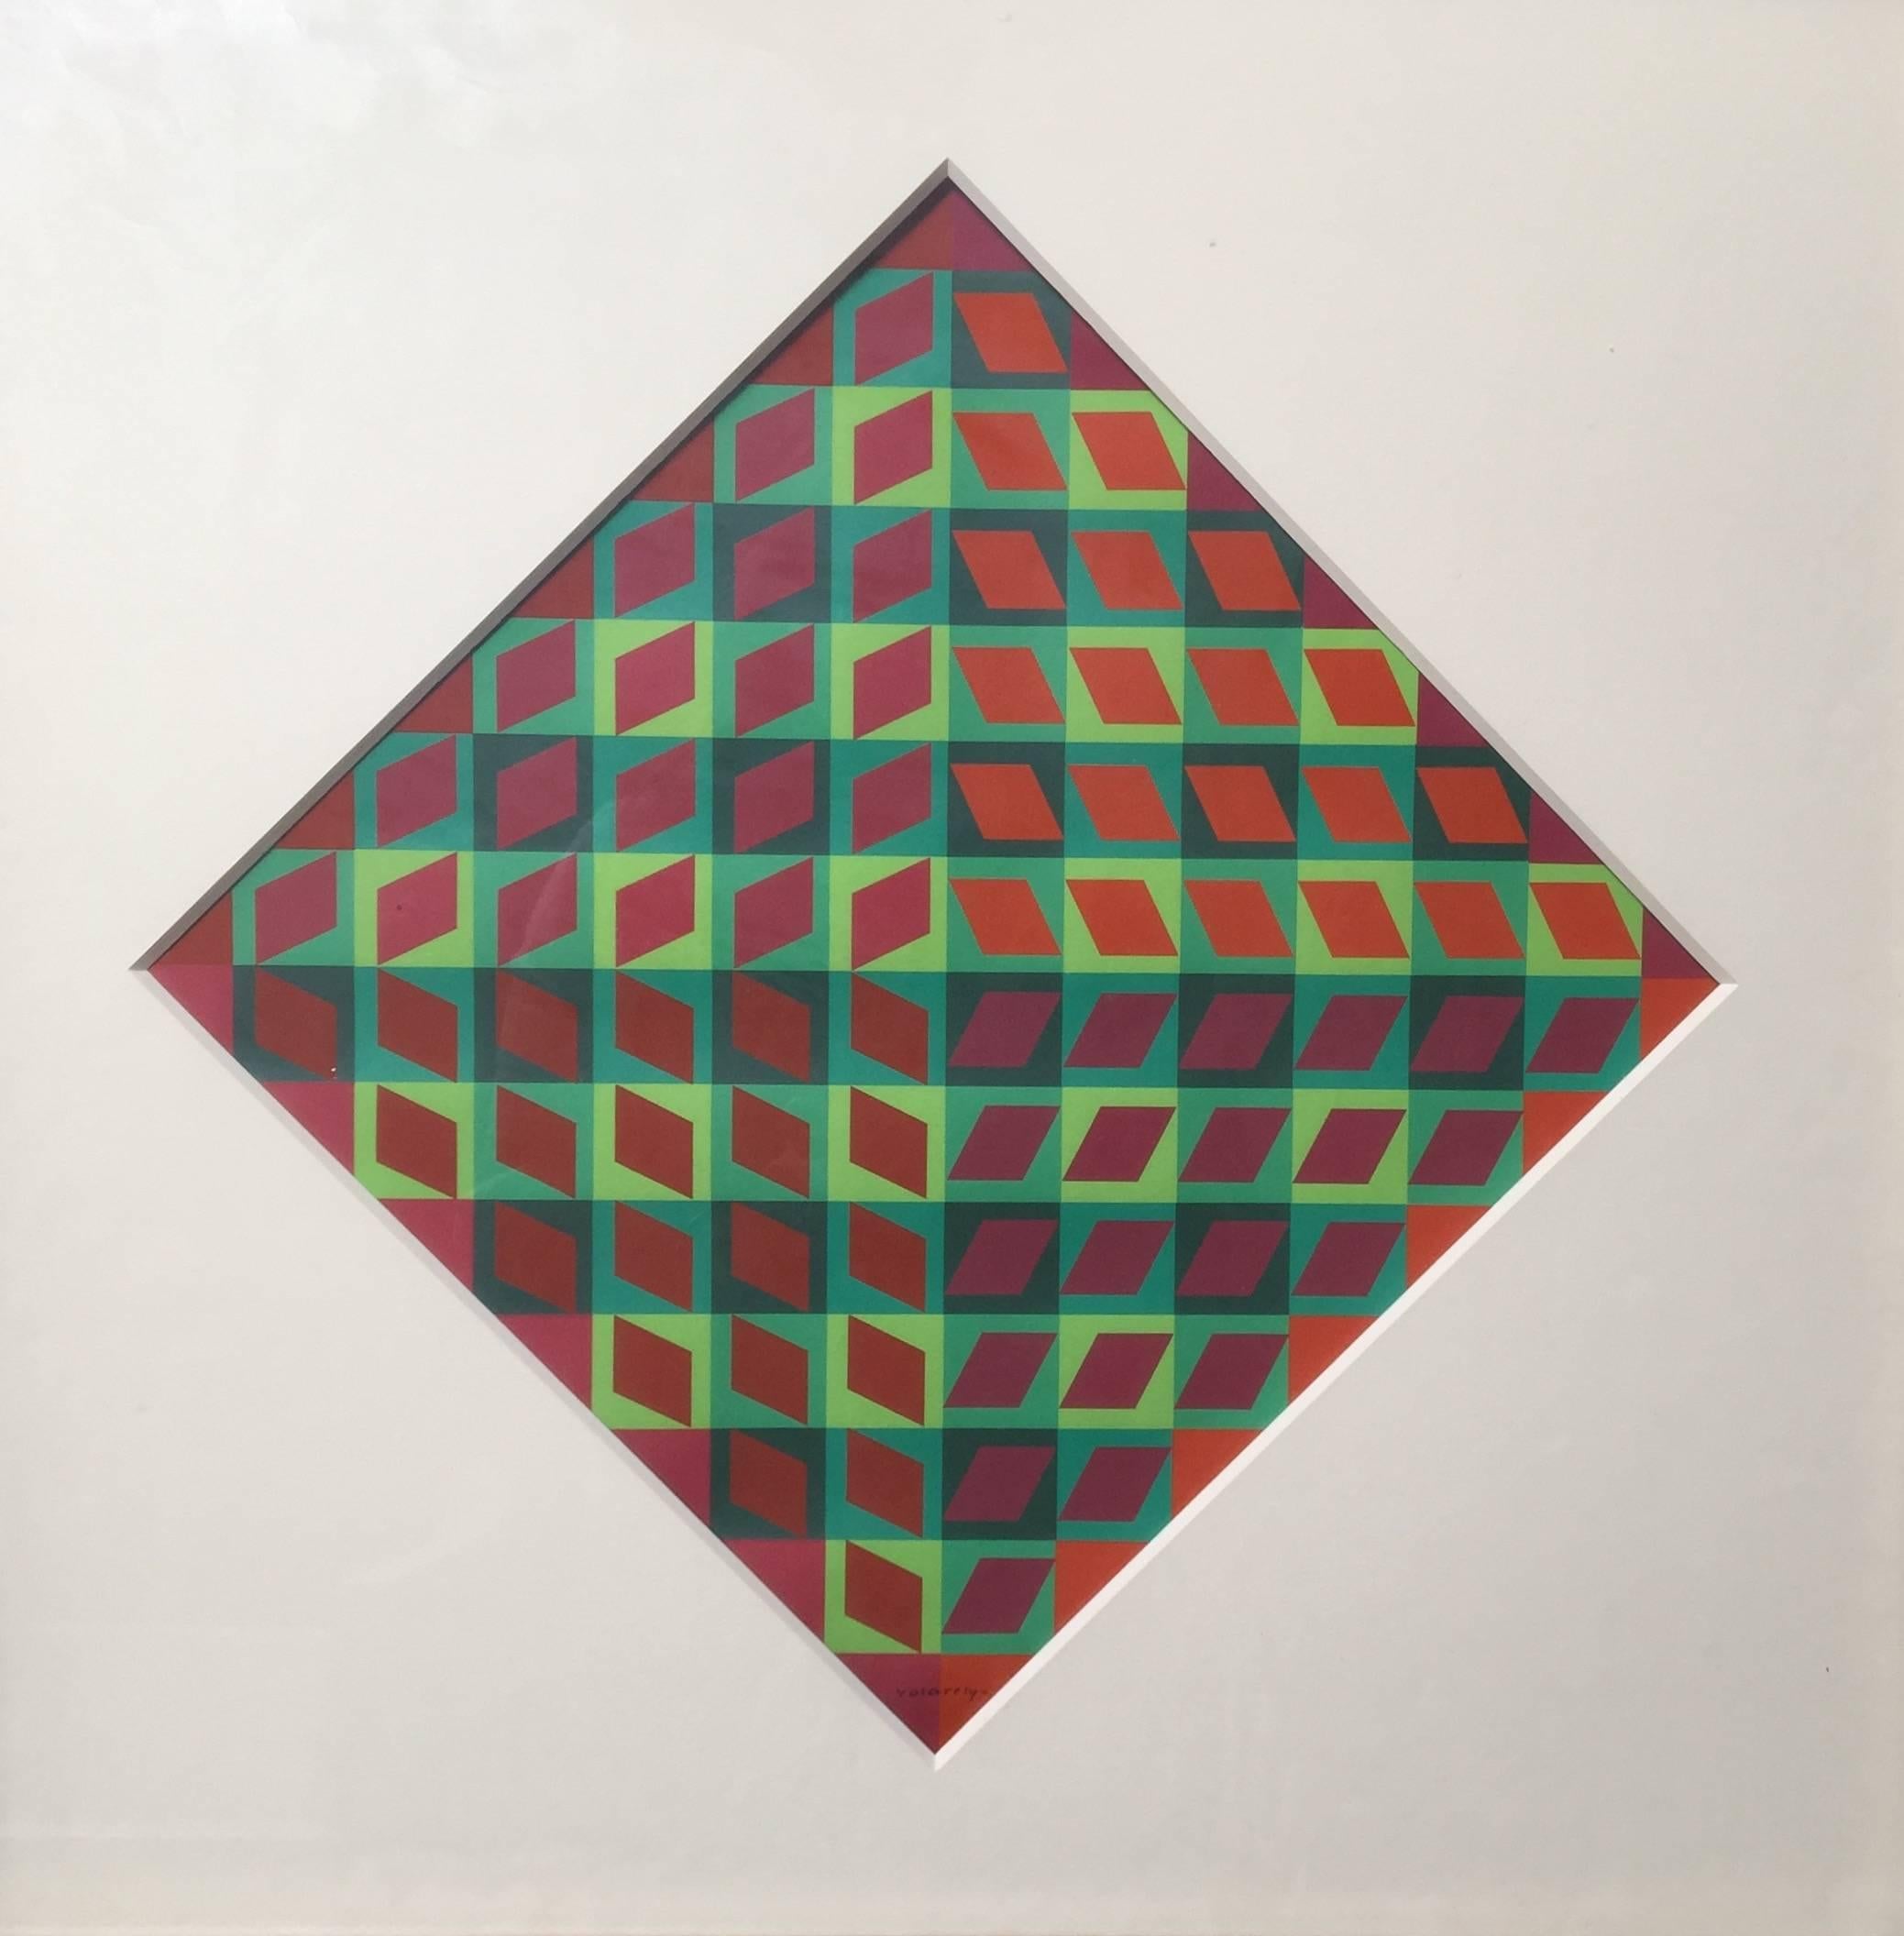 Screen print square, inscribed 'Vasarely' at bottom, hung diagonally,  sides of the square 23 1/2 x 23 1/2 (59.5 x 59.5); as hung, 33 x 33 (84 x 84). 

VICTOR VASARELY (1908-1997)
Internationally recognized as one of the most important artists of